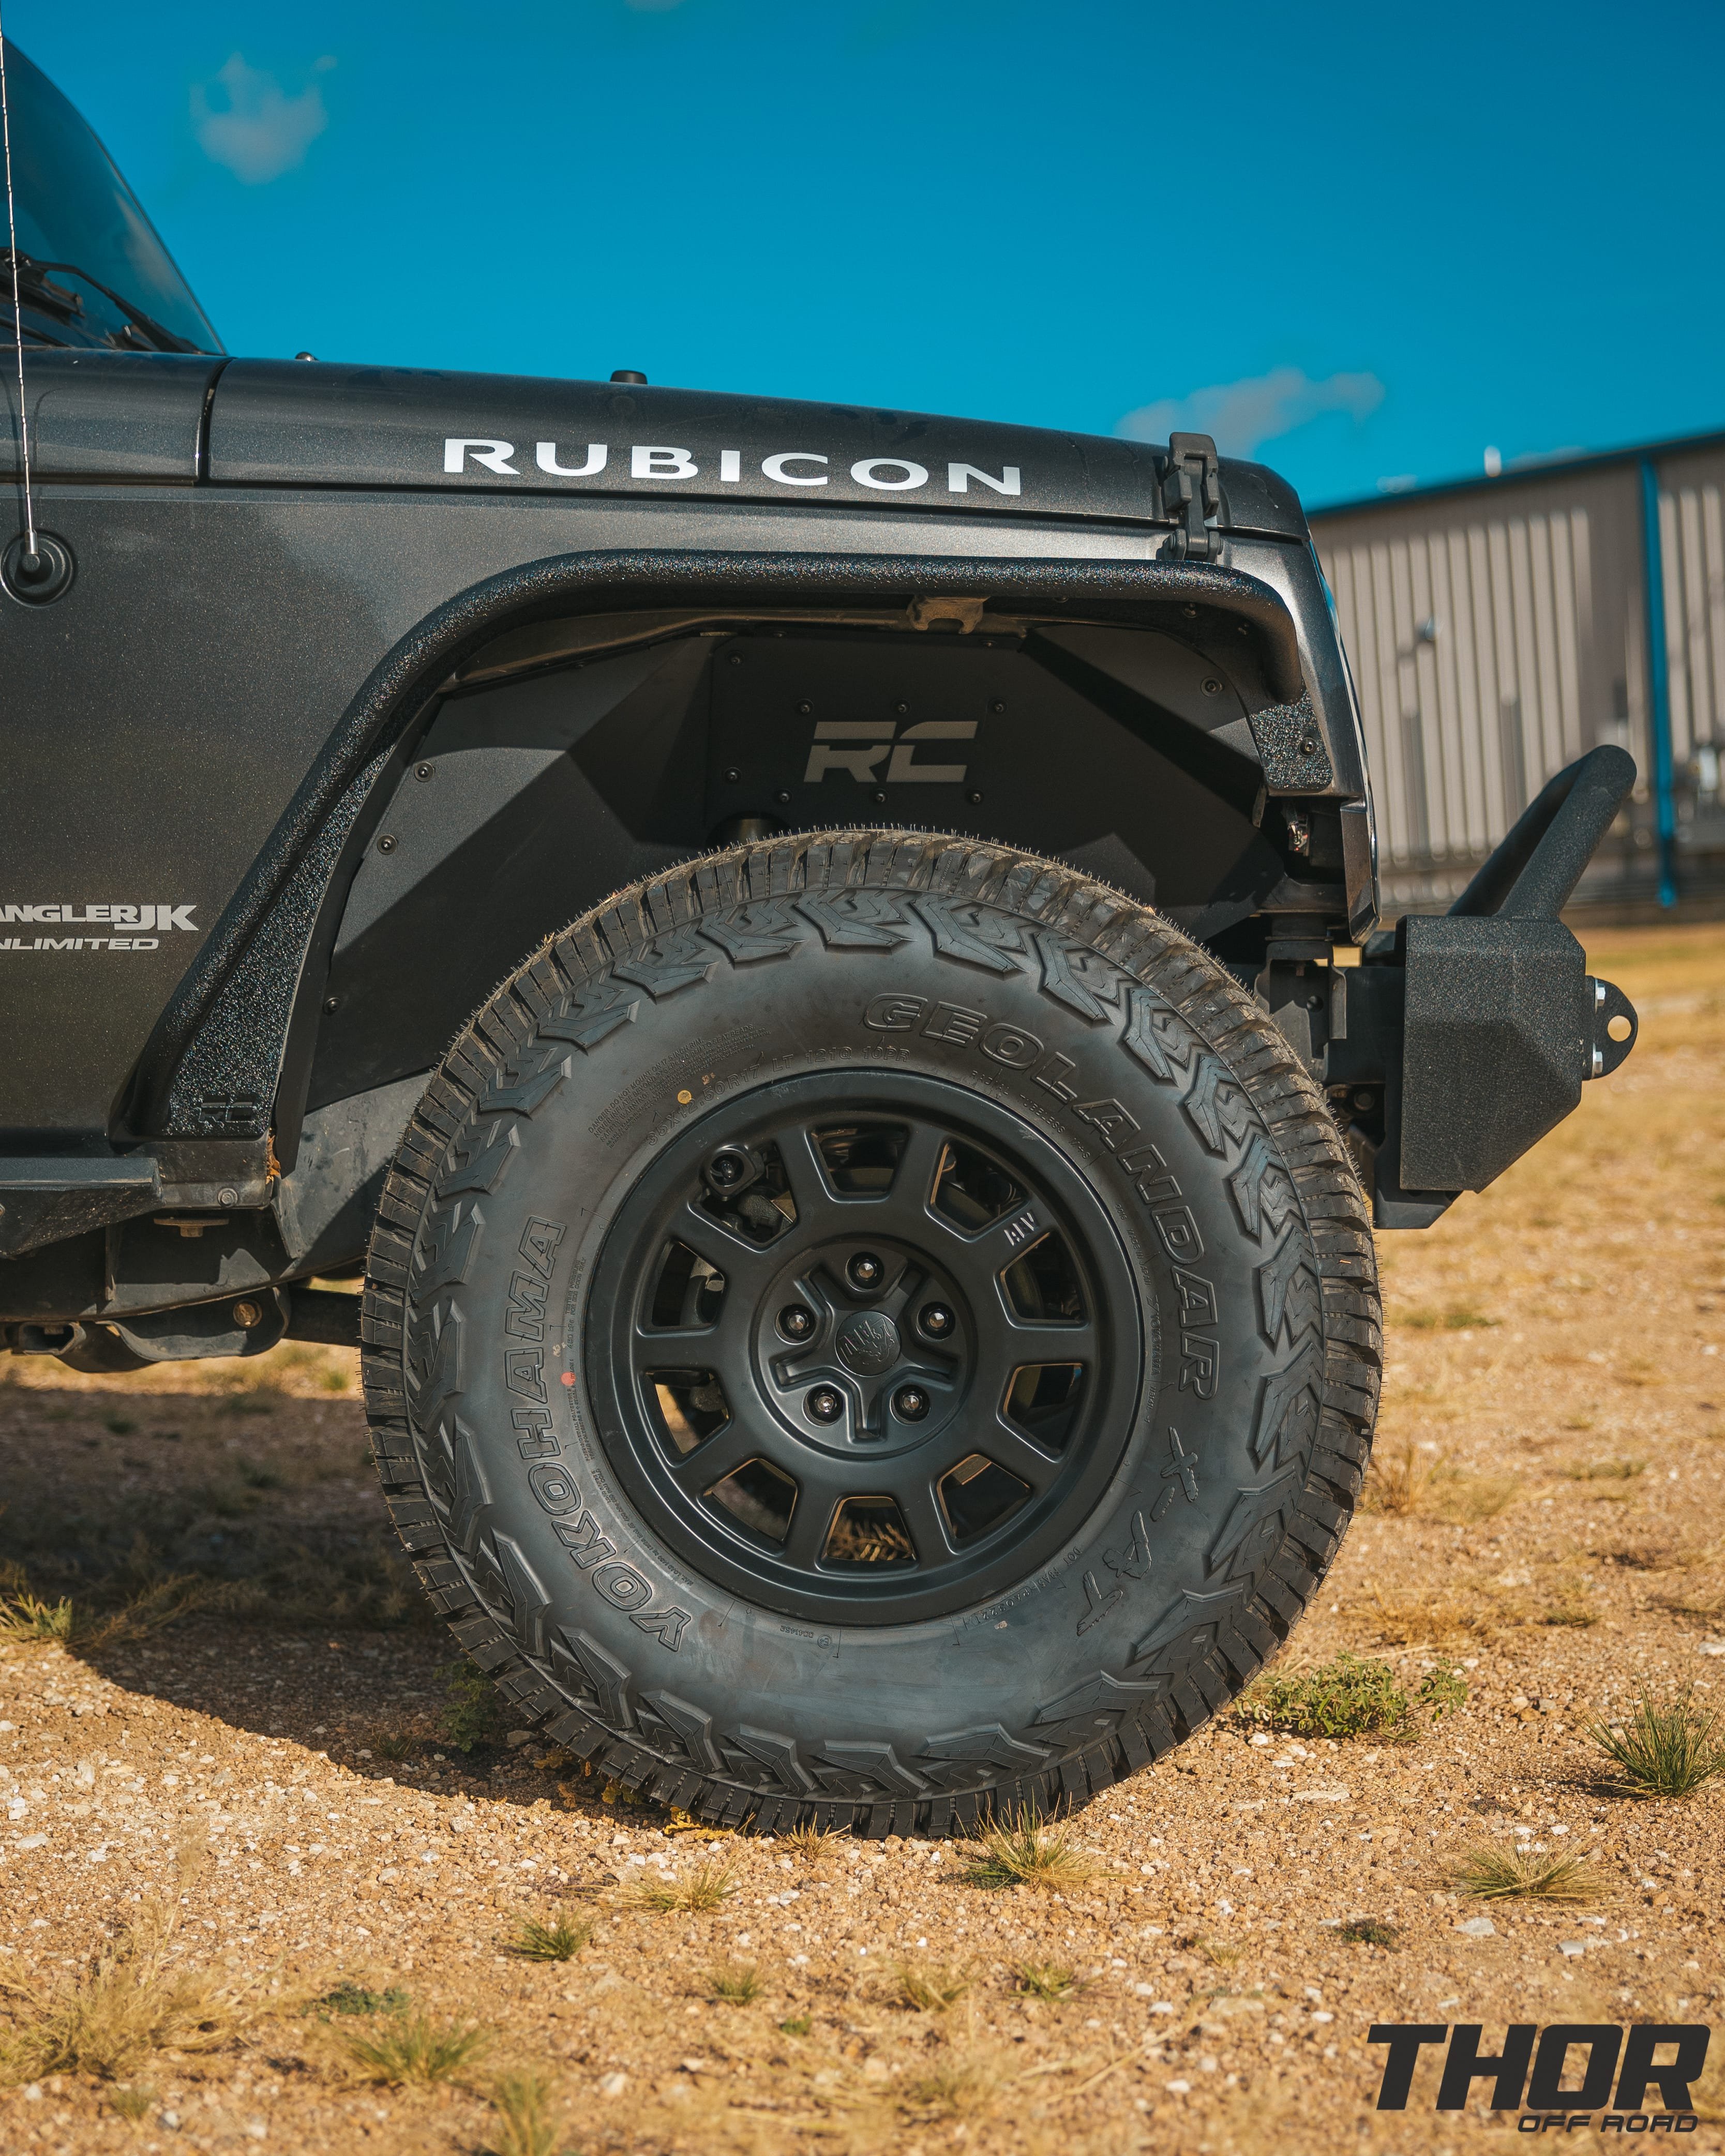 2018 Jeep Wrangler Unlimited Rubicon in Anvil Clearcoat with Rough Country 2.5" V2 Lift Kit, 17x8.5" AEV Salta Matte Black Wheels, 35x12.50R17 Yokohama Geolander X-AT Tires, Fender Flares